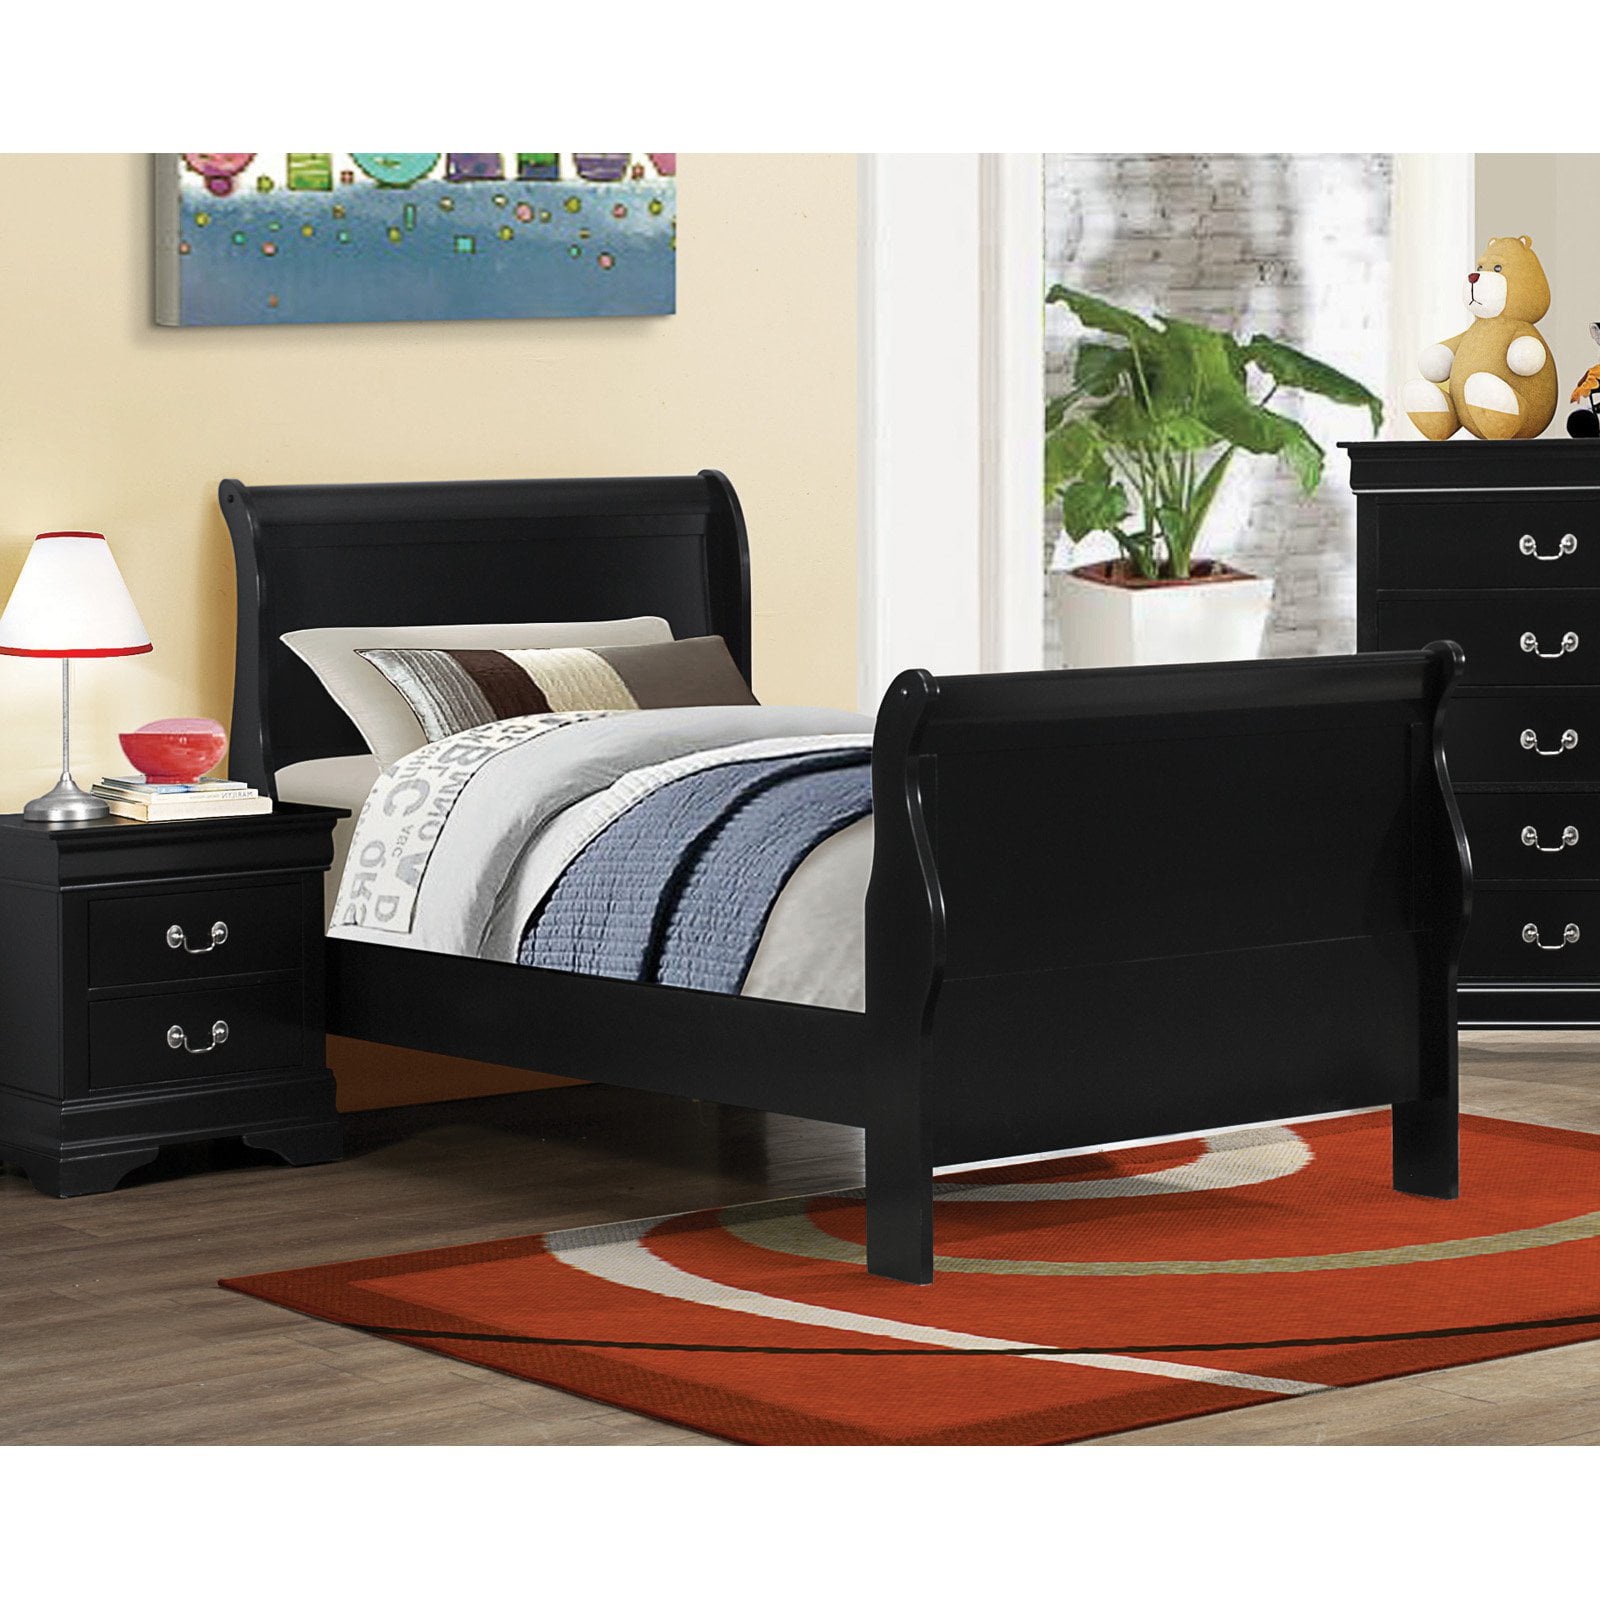 Coaster Louis Philippe Two Drawer Nightstand in Black - Walmart.com